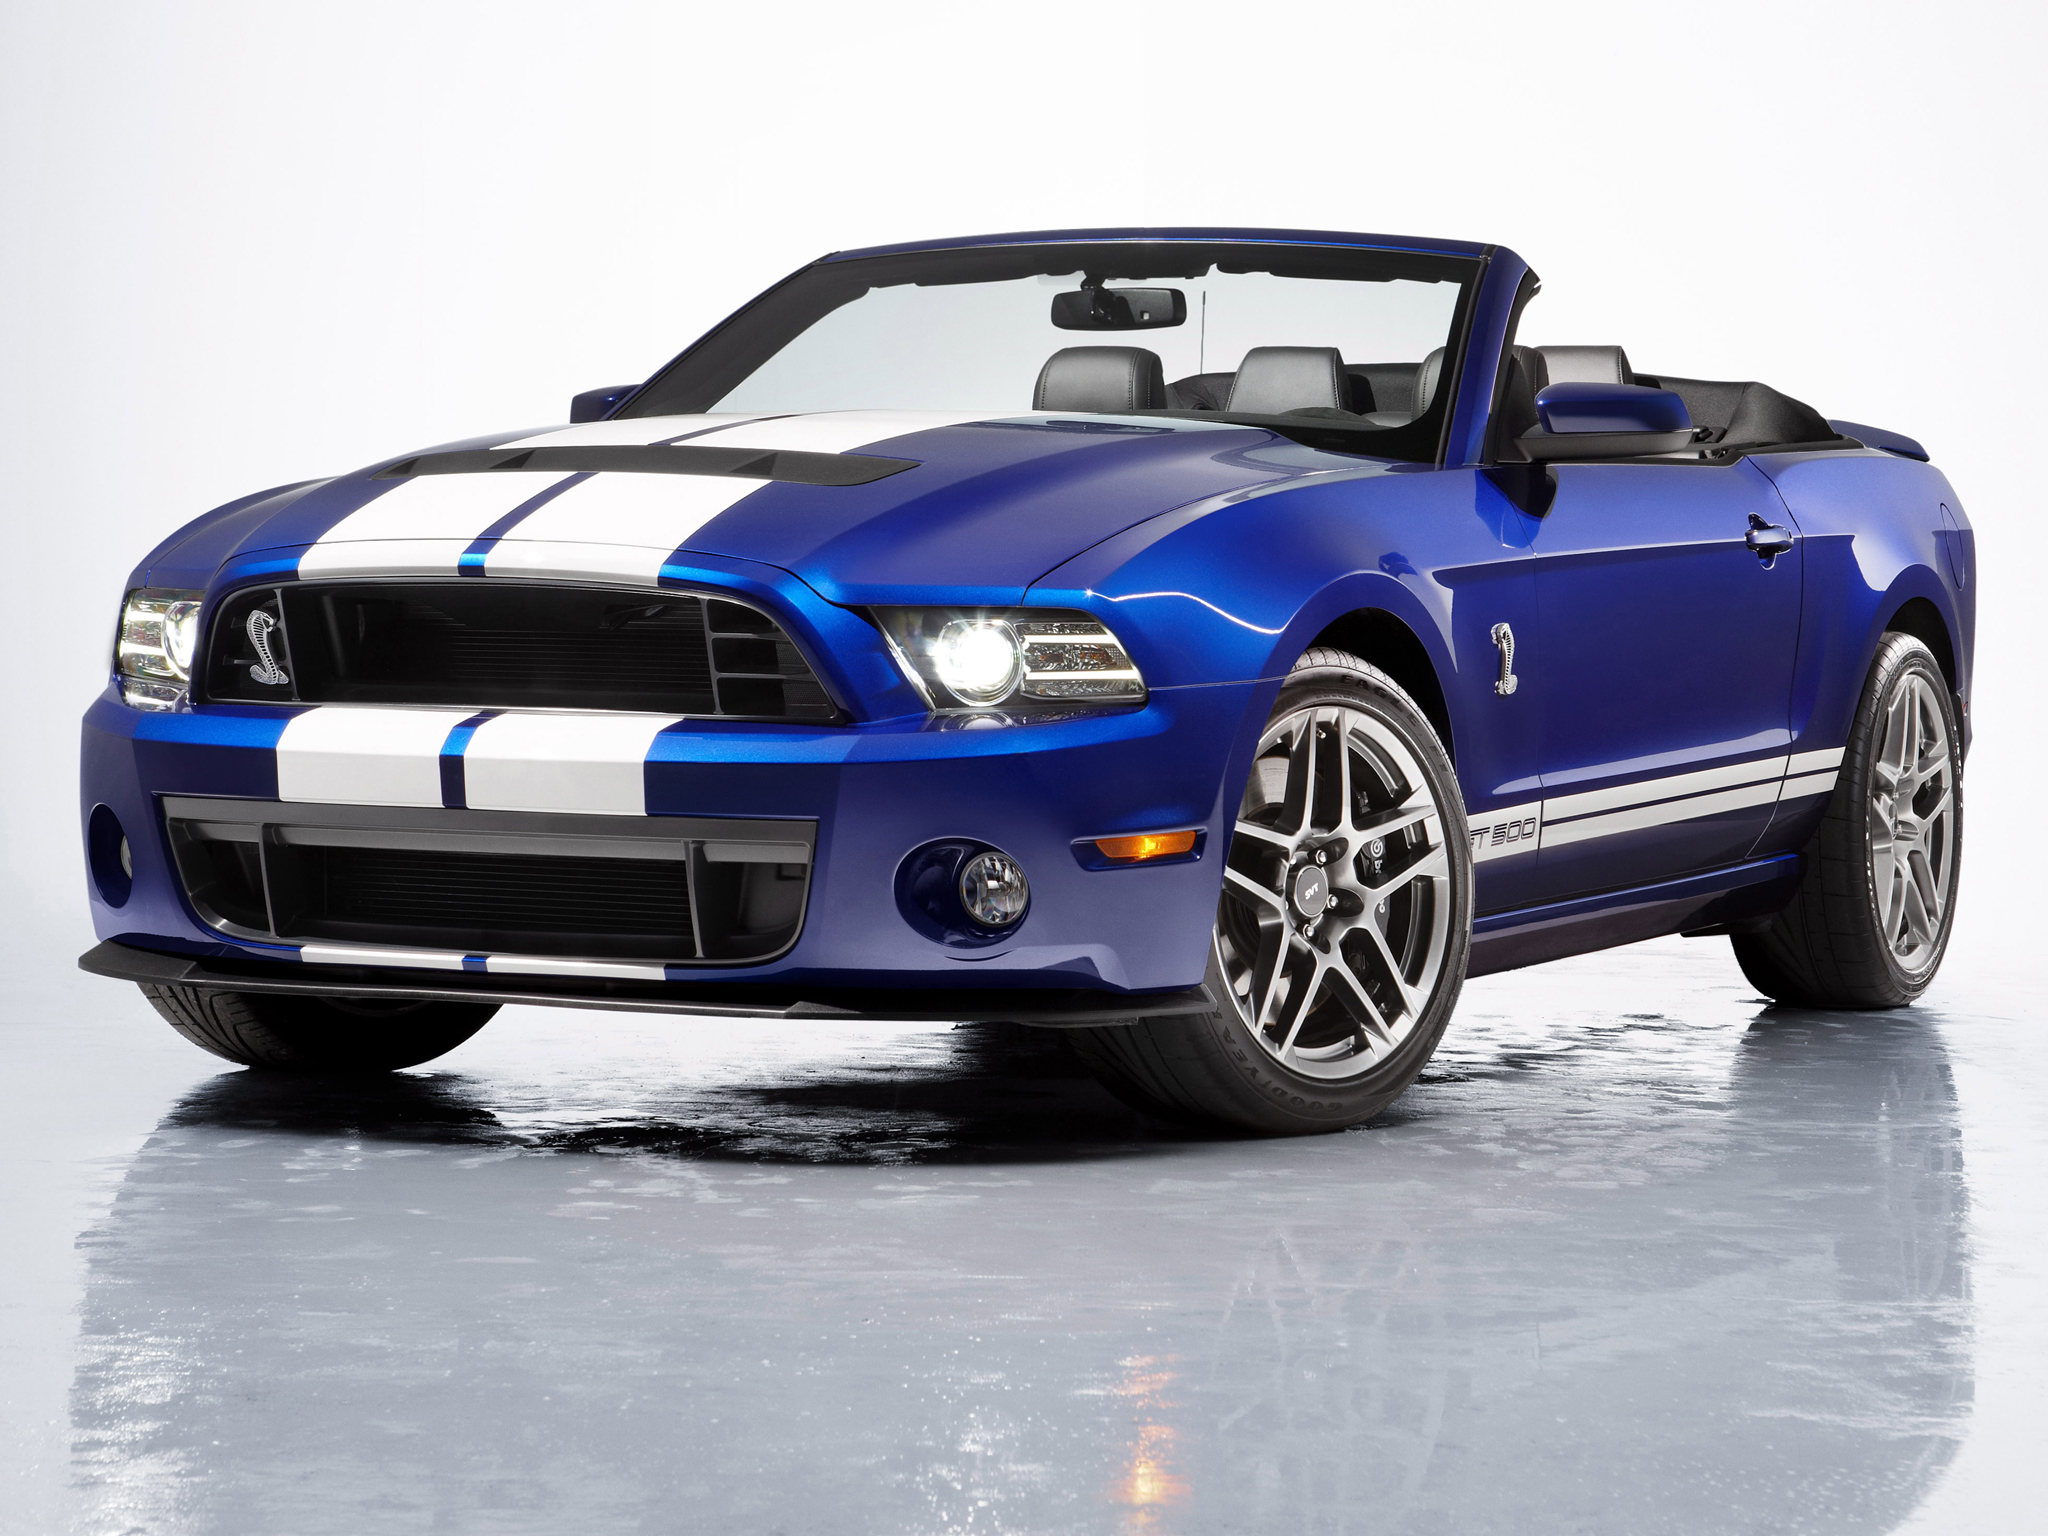 2012, Shelby, Gt500, Svt, Convertible, Ford, Mustang, Muscle Wallpaper